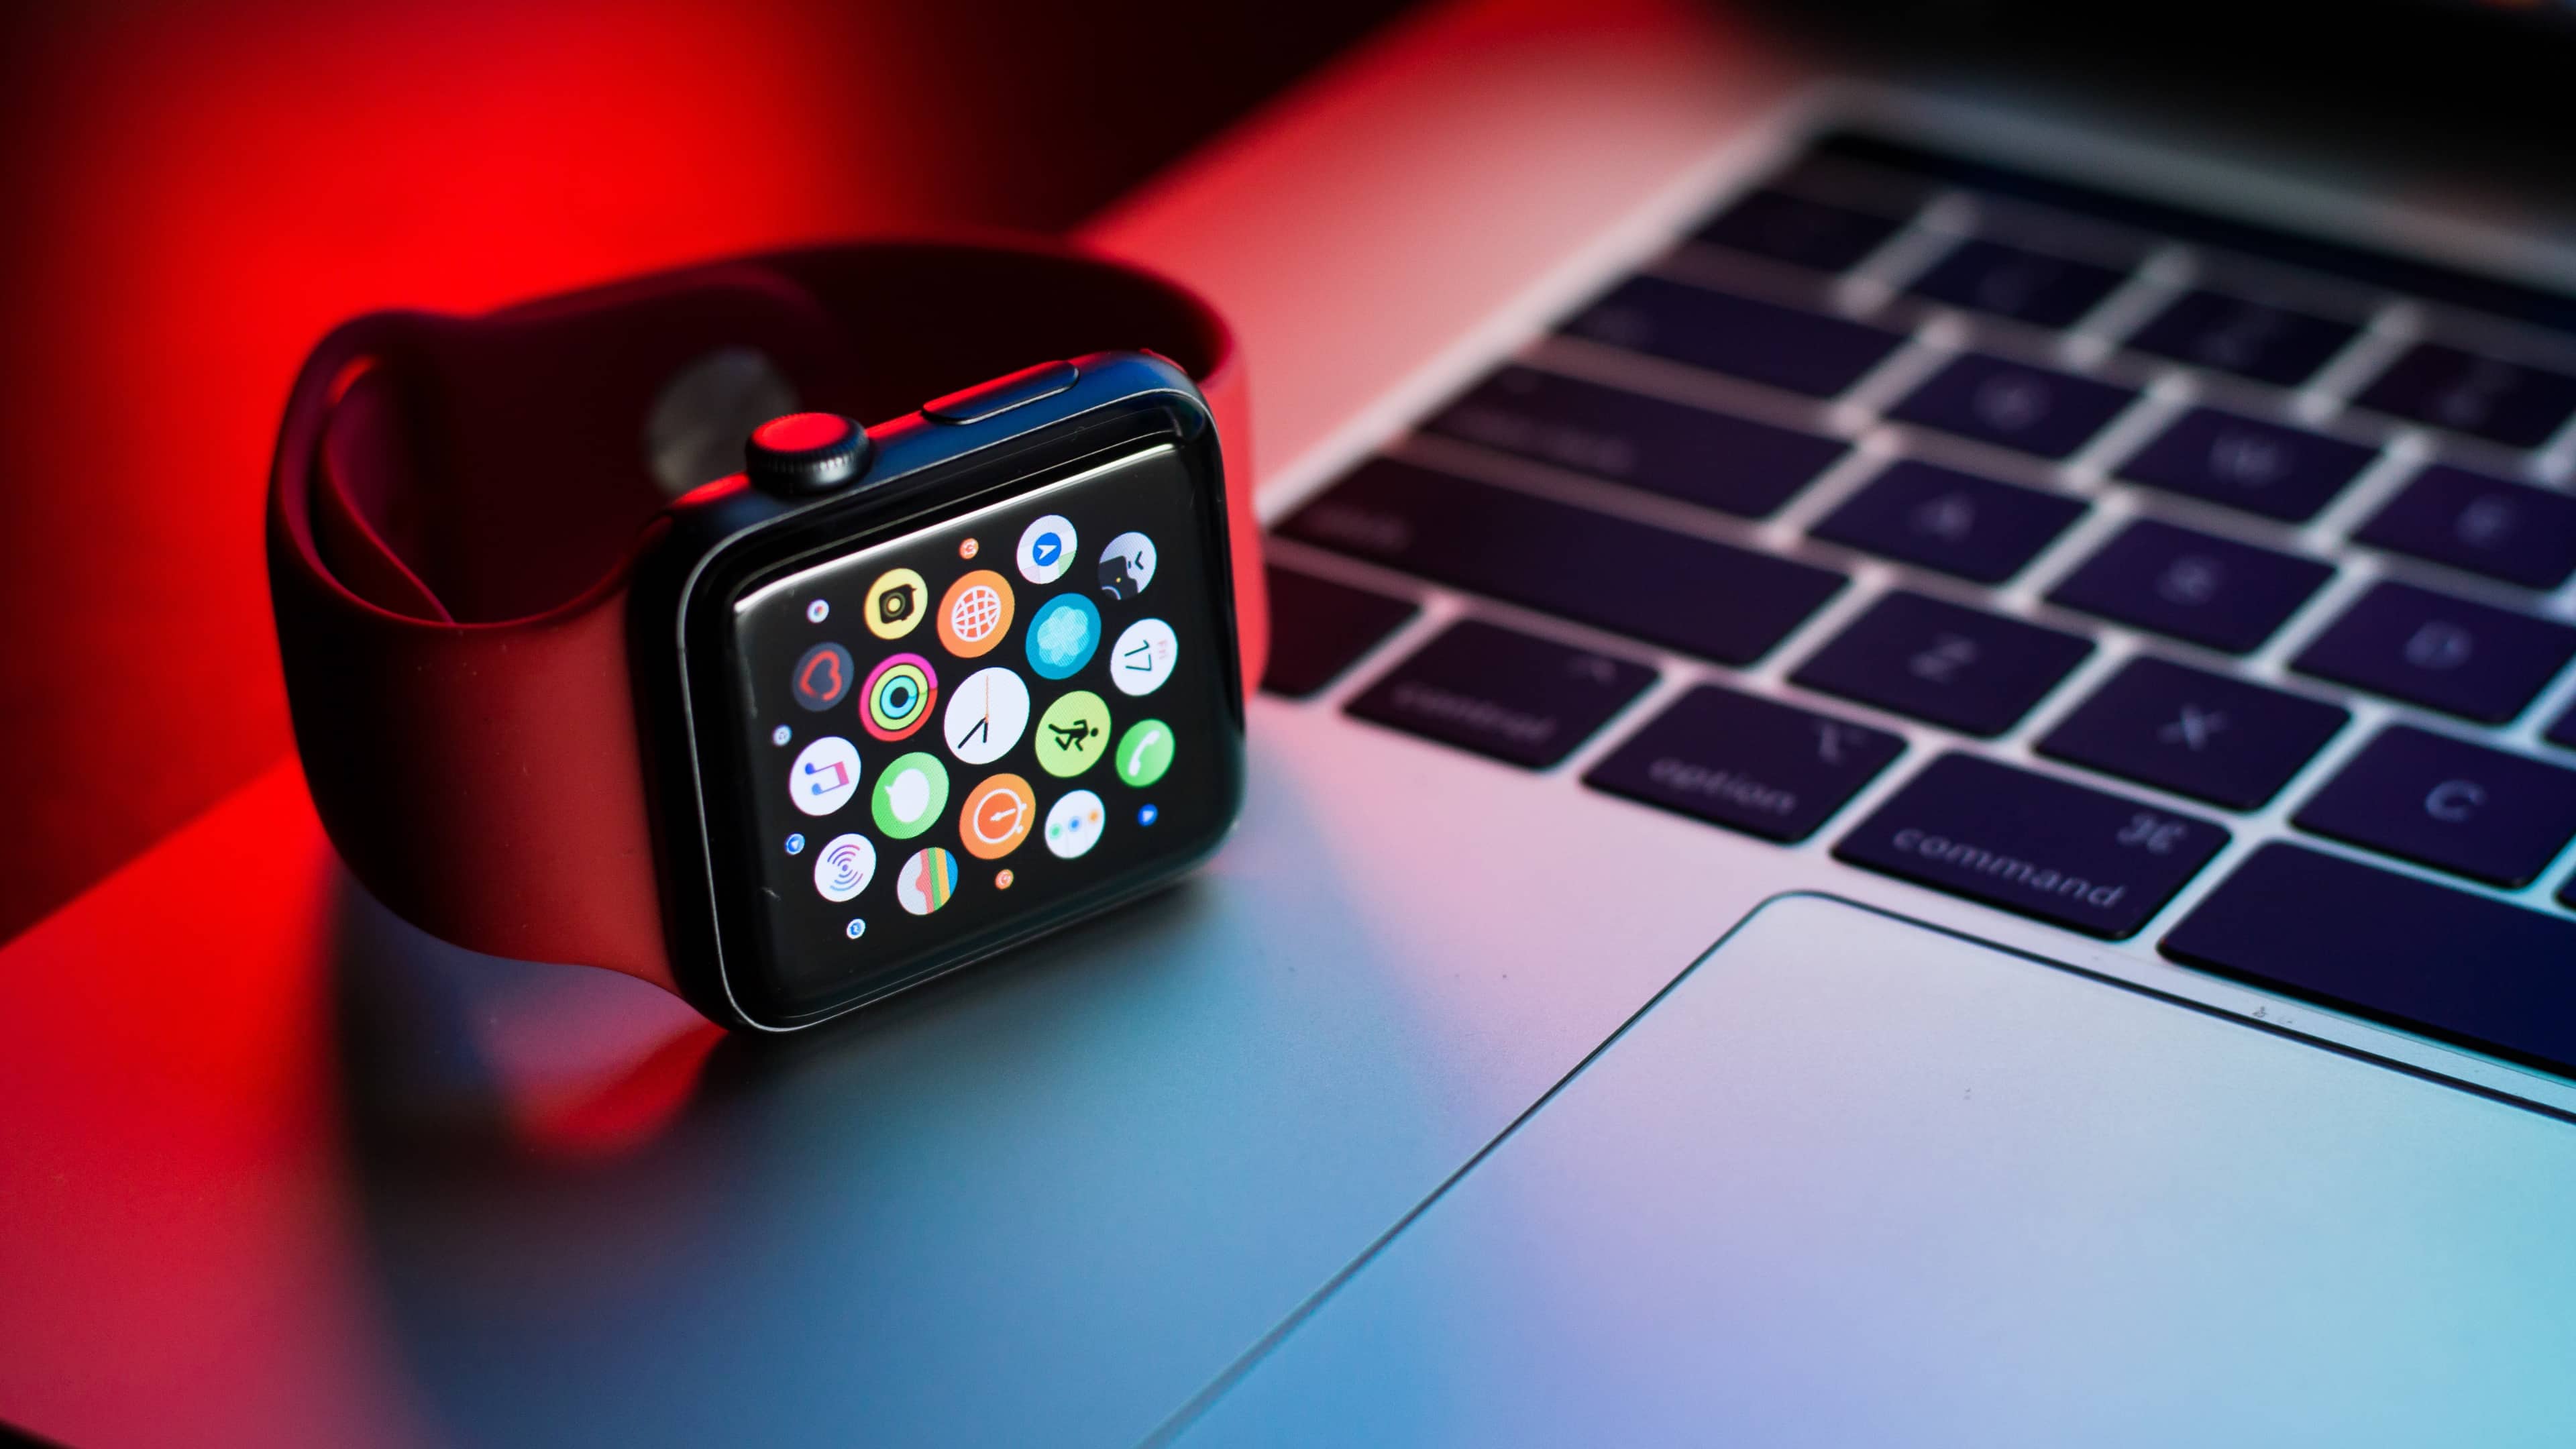 A black Apple Watch Series 7 is pictured resting on its side next to the trackpad on Apple's MacBook Pro notebook in this featured image from Unsplash